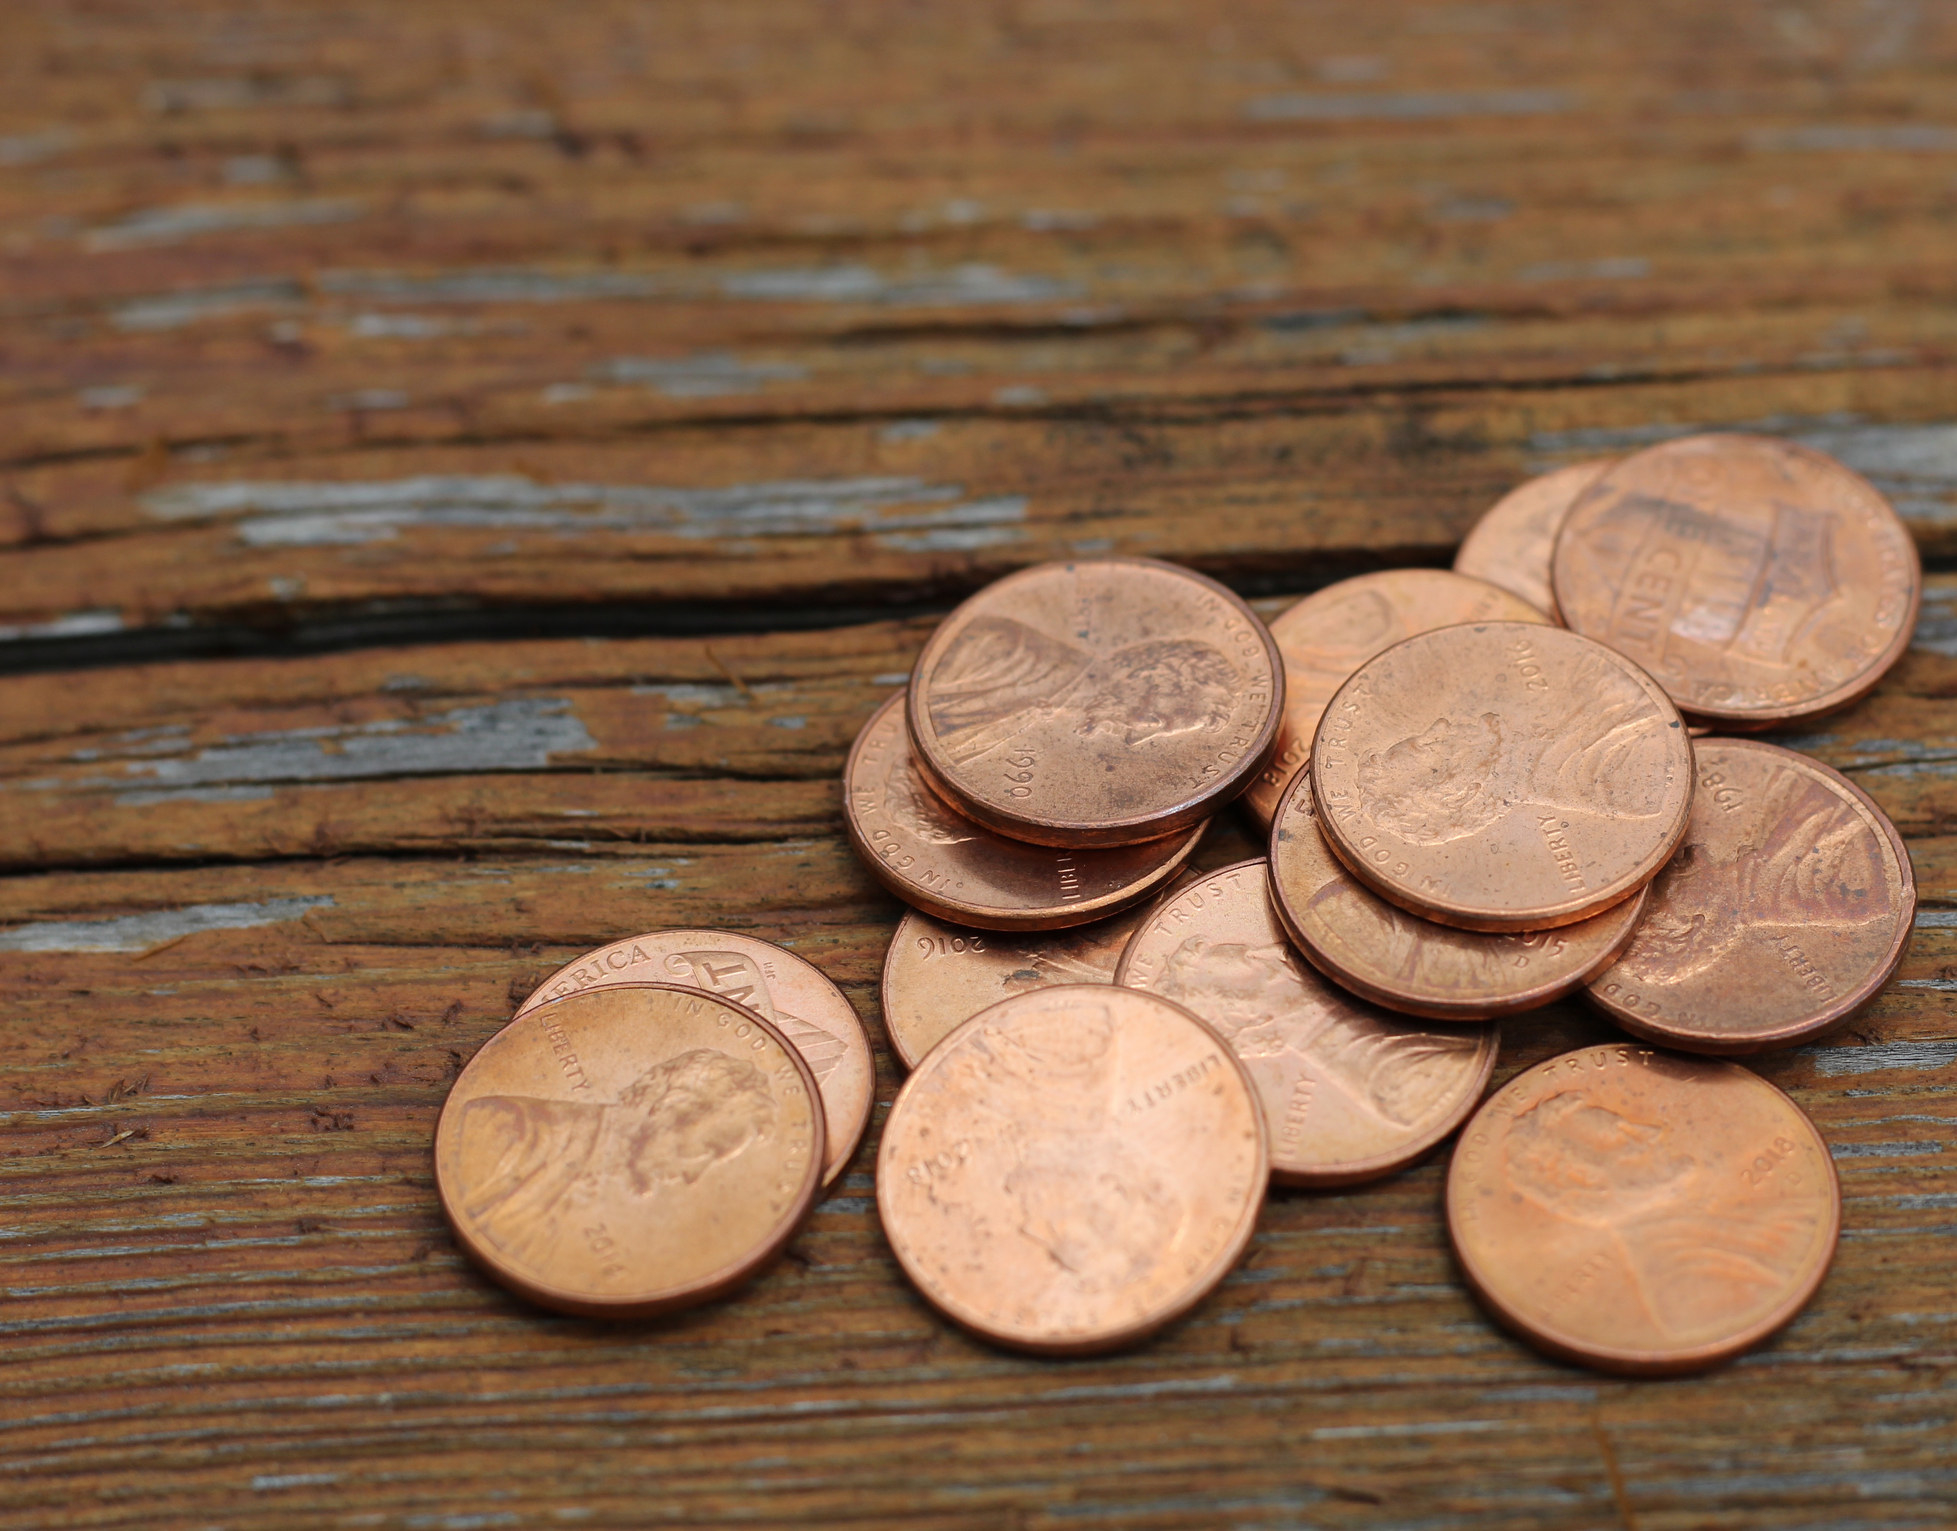 Pennies on a wooden surface